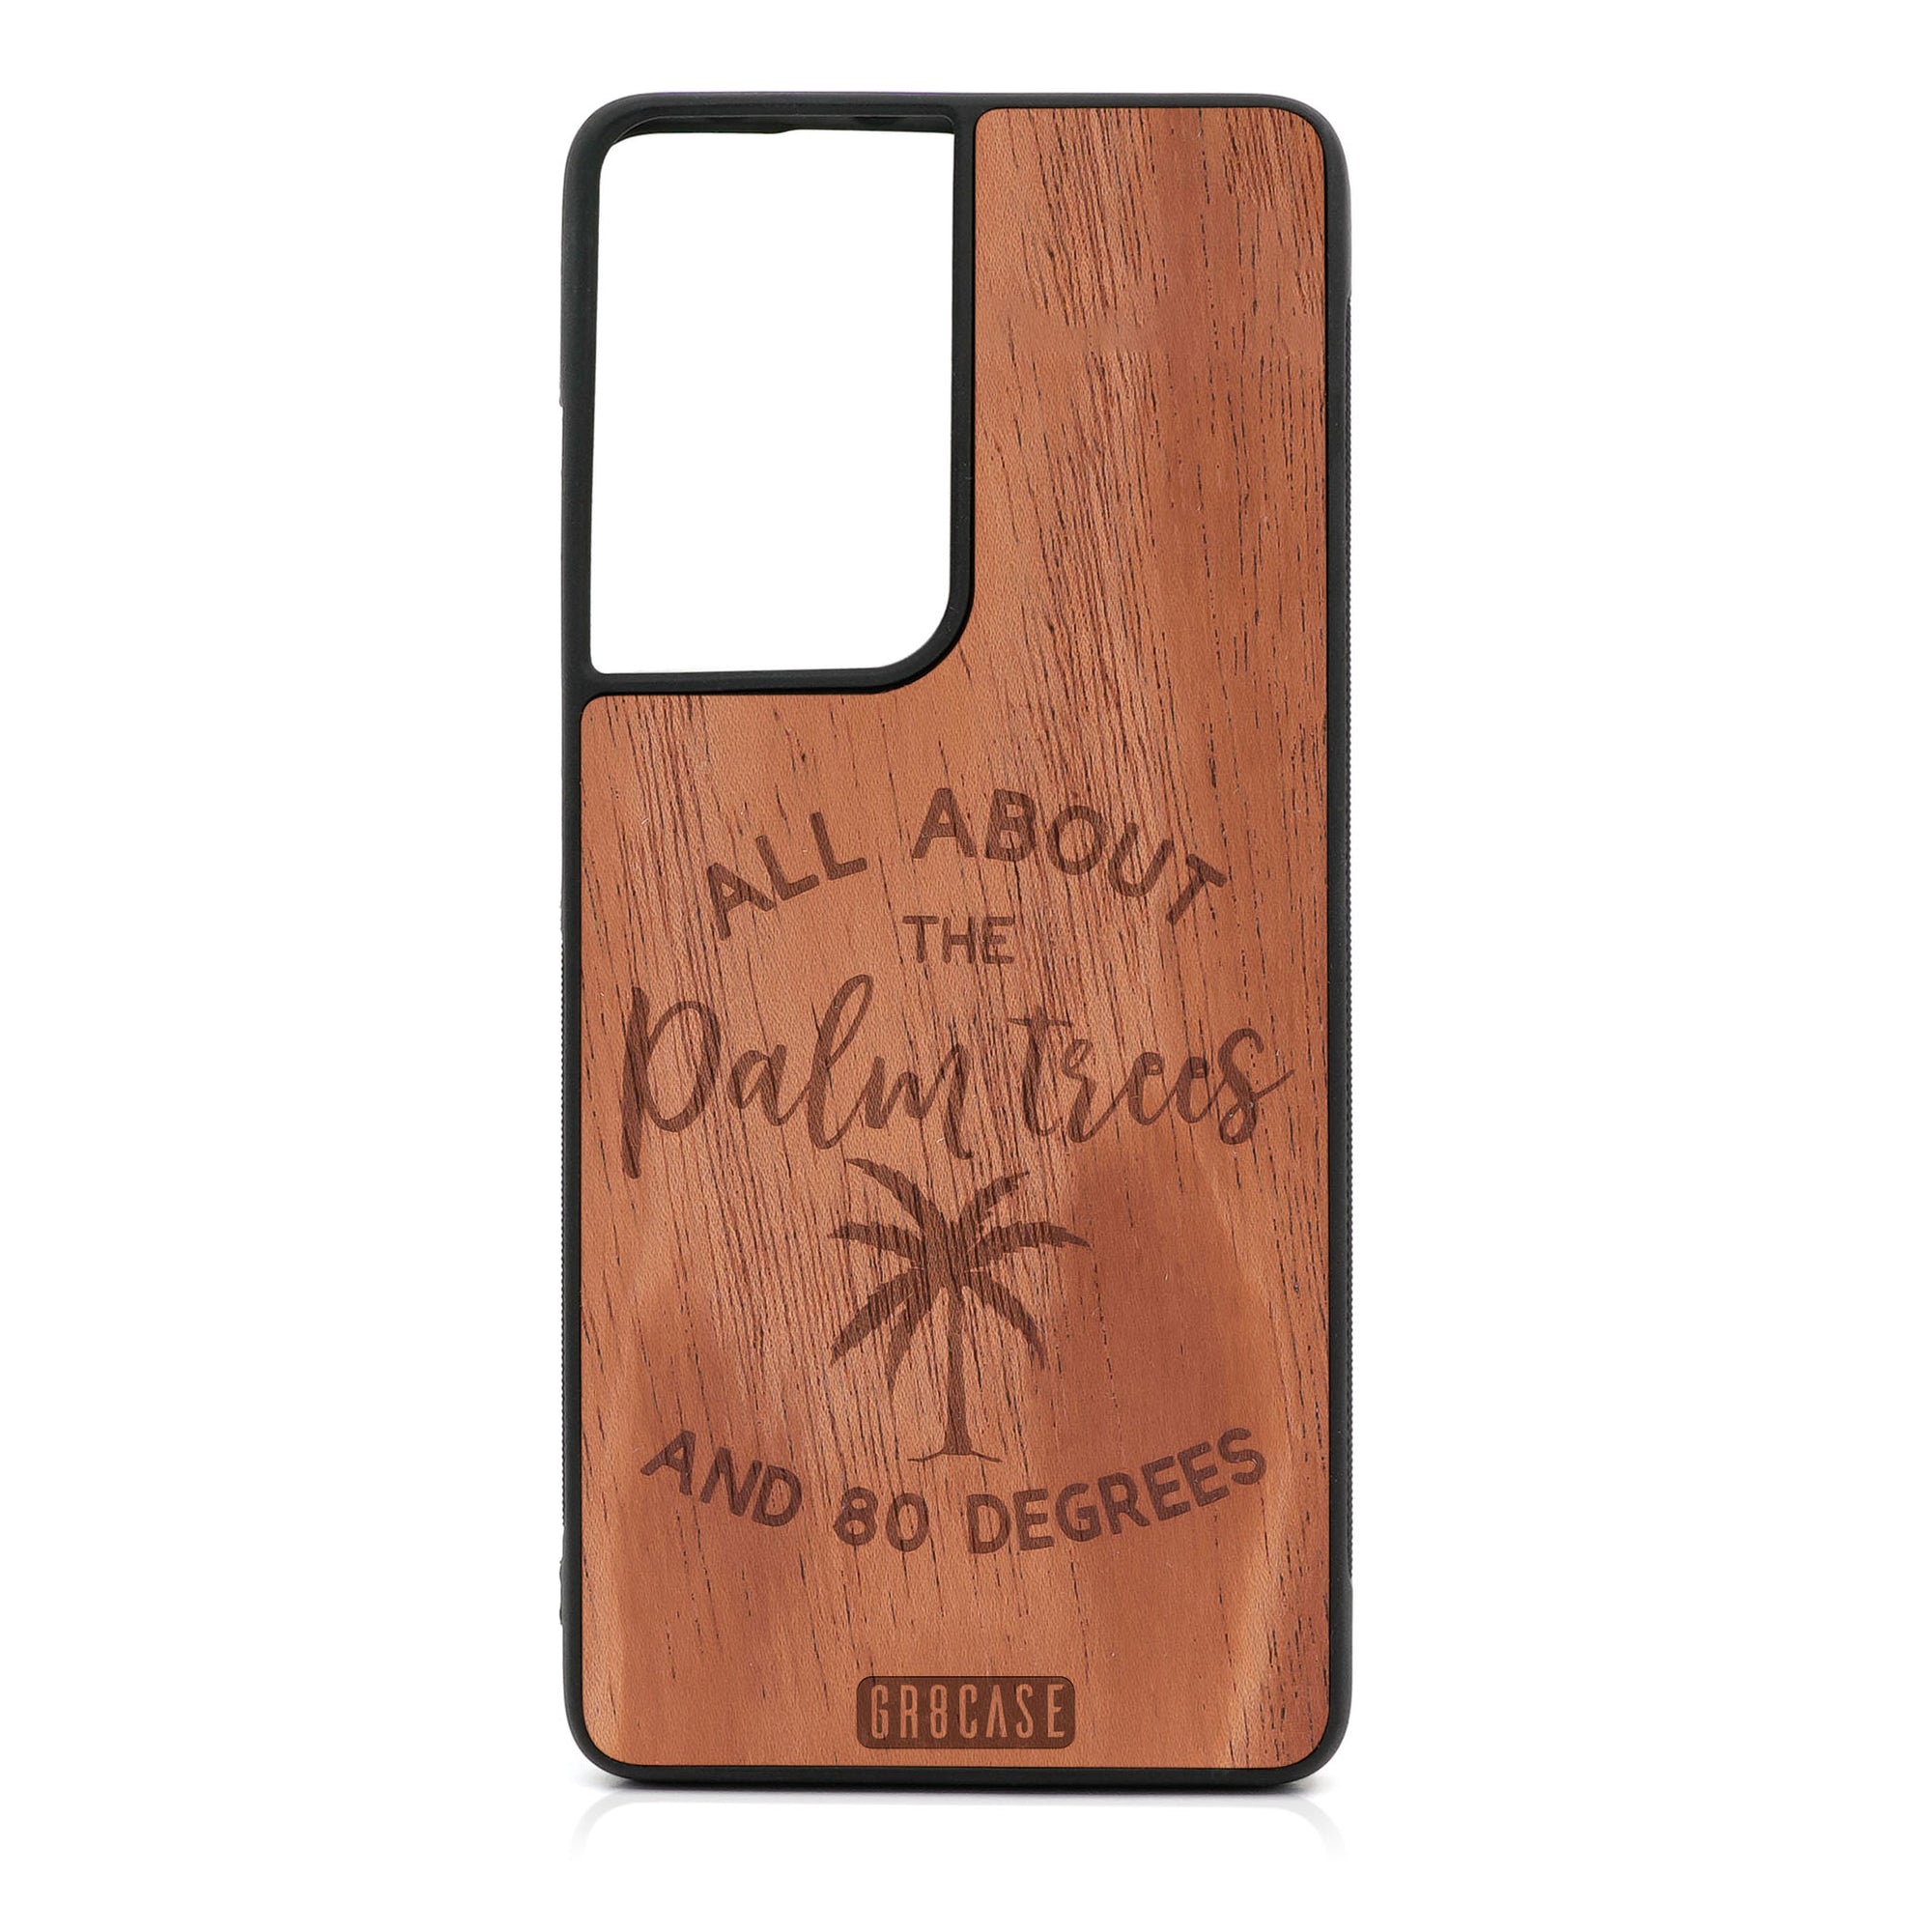 All About The Palm Trees and 80 Degrees Design Wood Case For Samsung Galaxy S21 Ultra